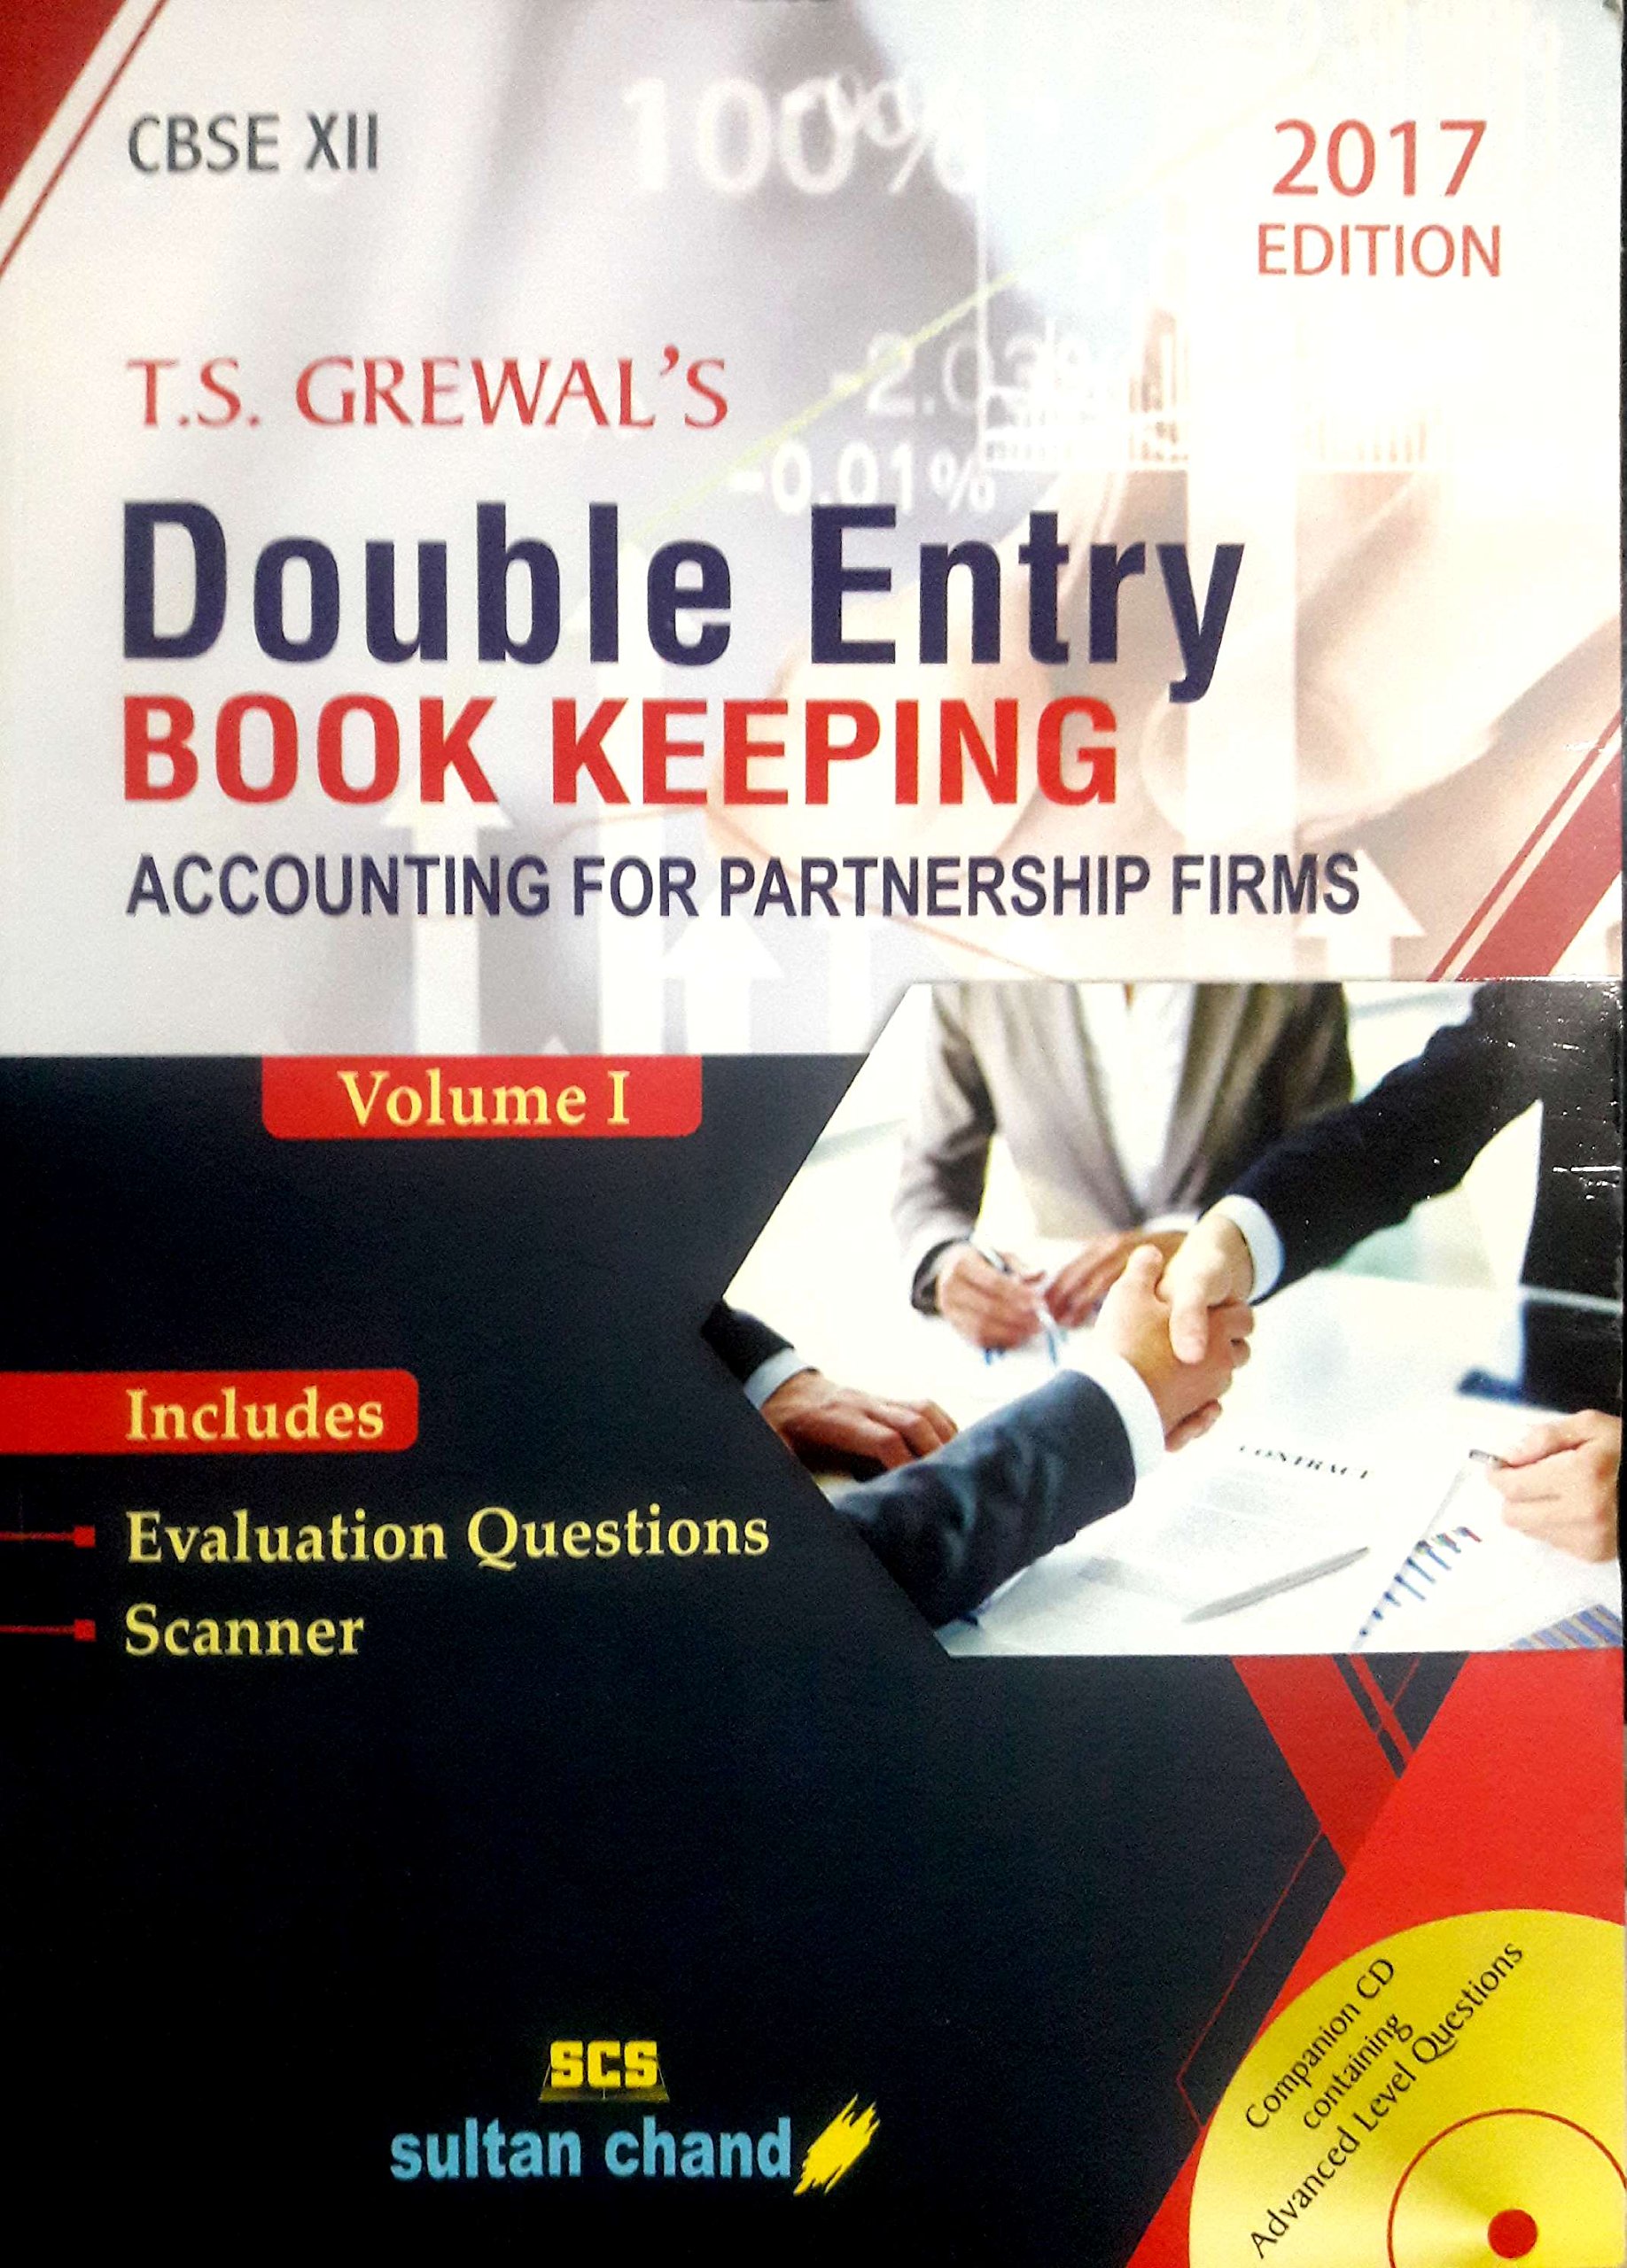 DOUBLE ENTRY BOOK KEEPING ACCOUNTING FOR PARTNERSHIP FIRMS VOLUME I 